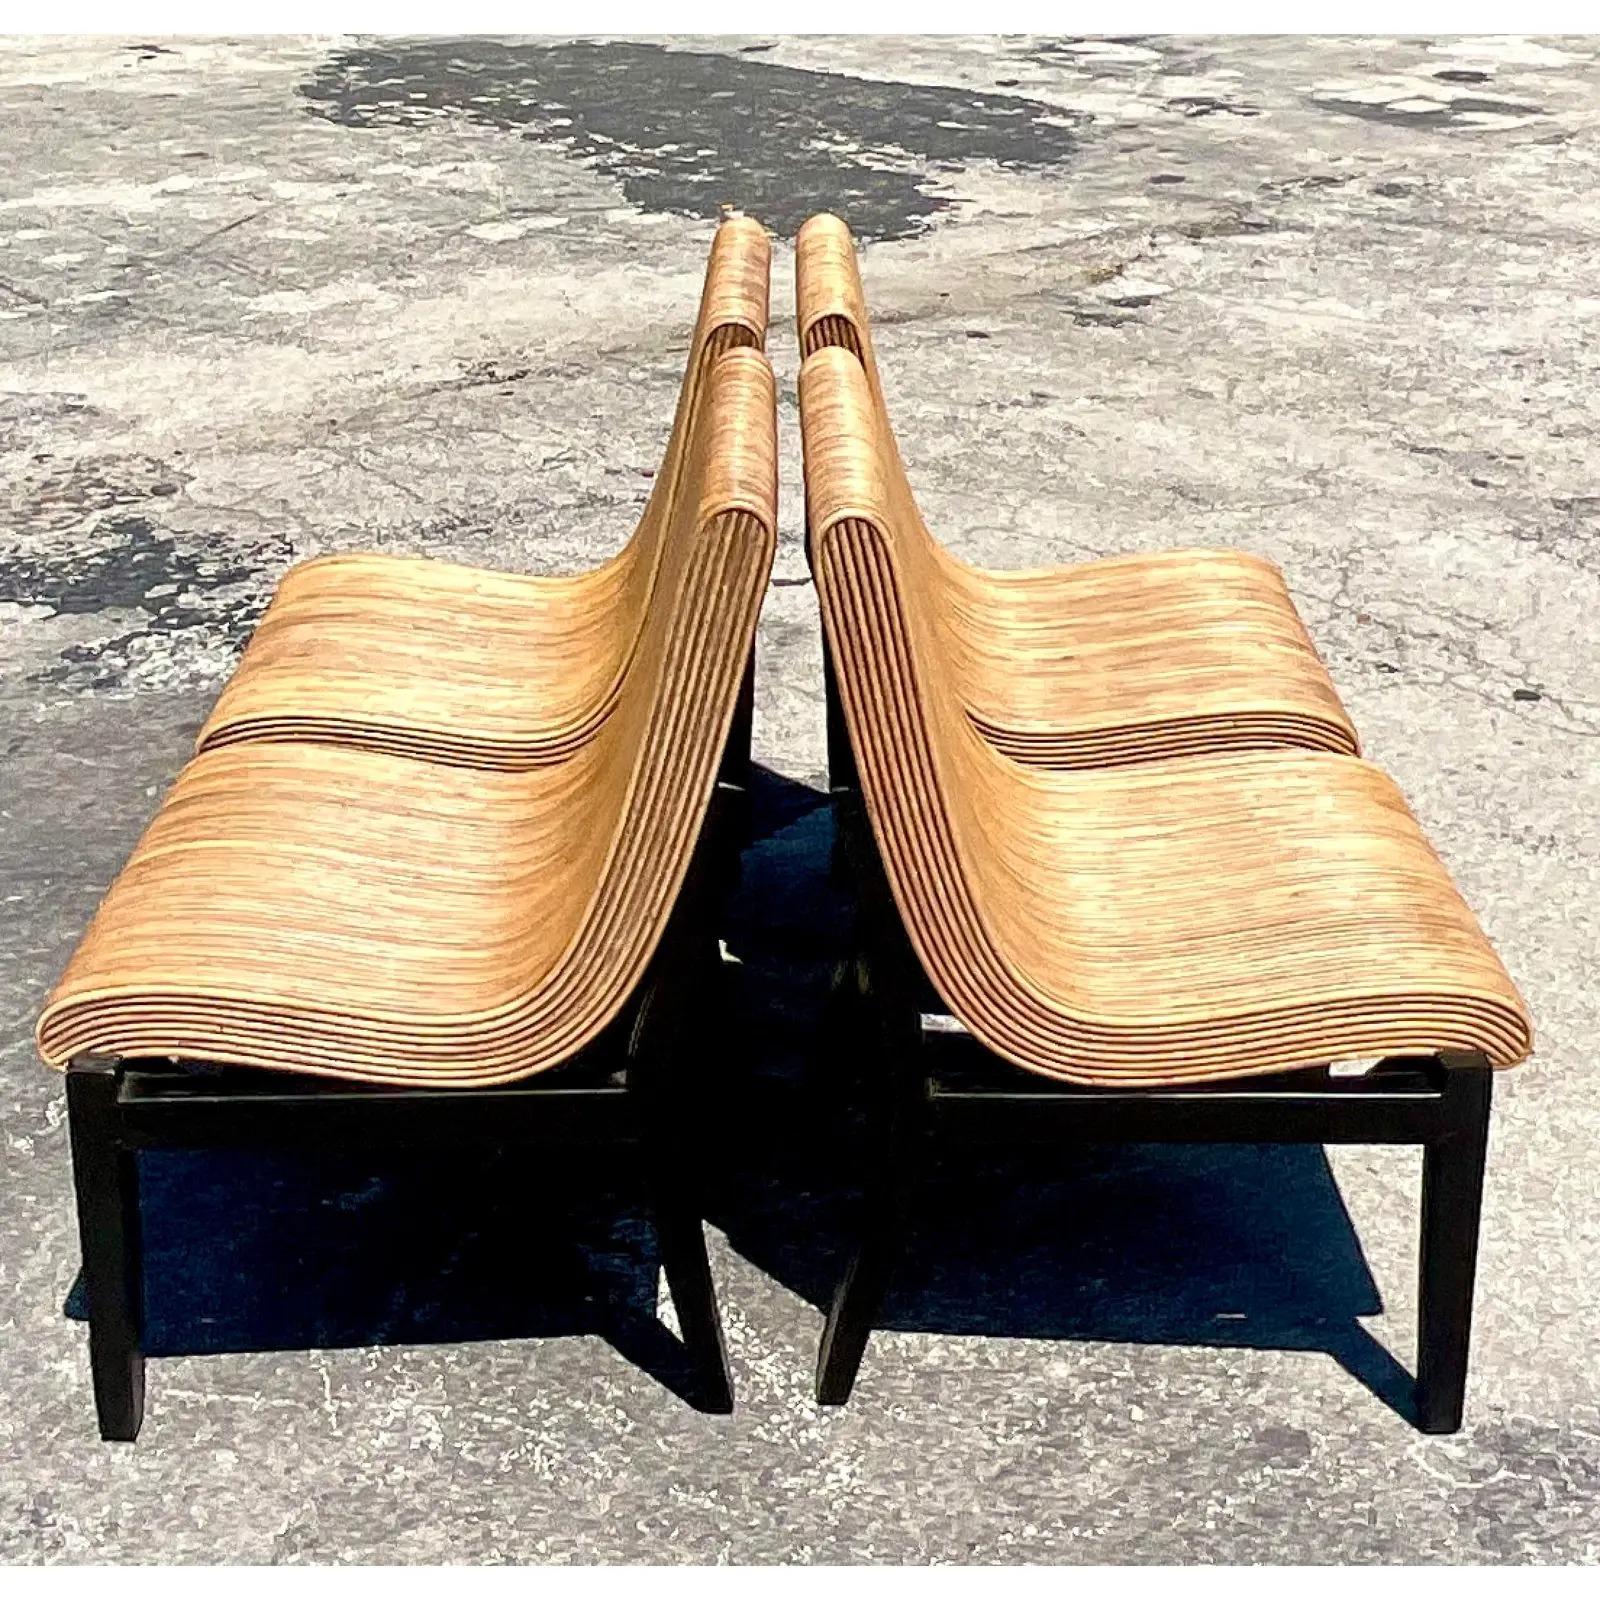 Fabulous set of four Coastal dining chairs. Beautiful light pencil reed in a chic contemporary shape. This set of slightly lighter in color than the other set that is available on my page. Acquired from a Palm Beach estate.